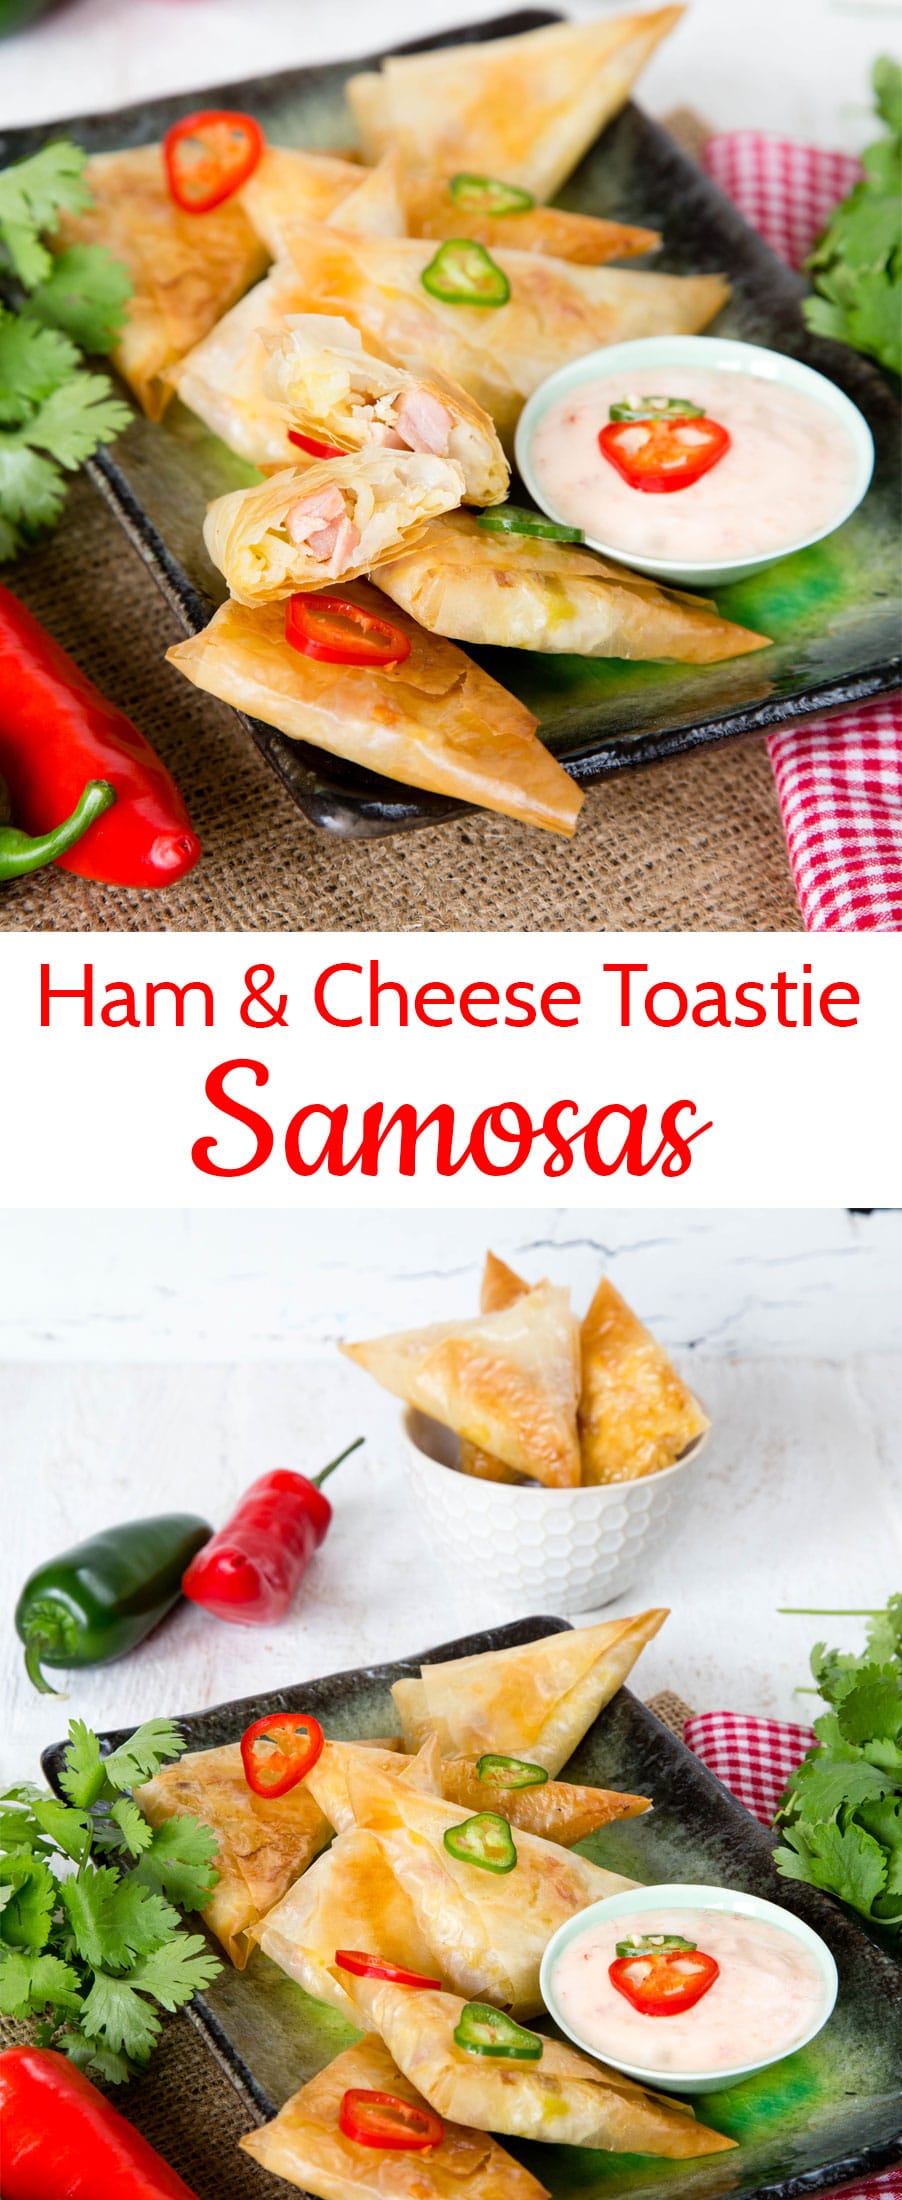 Samosas are fantastically easy to make, as well as adaptable. These are filled with cooked rice, diced ham, leftover roast chicken and some sweetcorn. These are great to serve at a party, and ideal for older children to help fold.